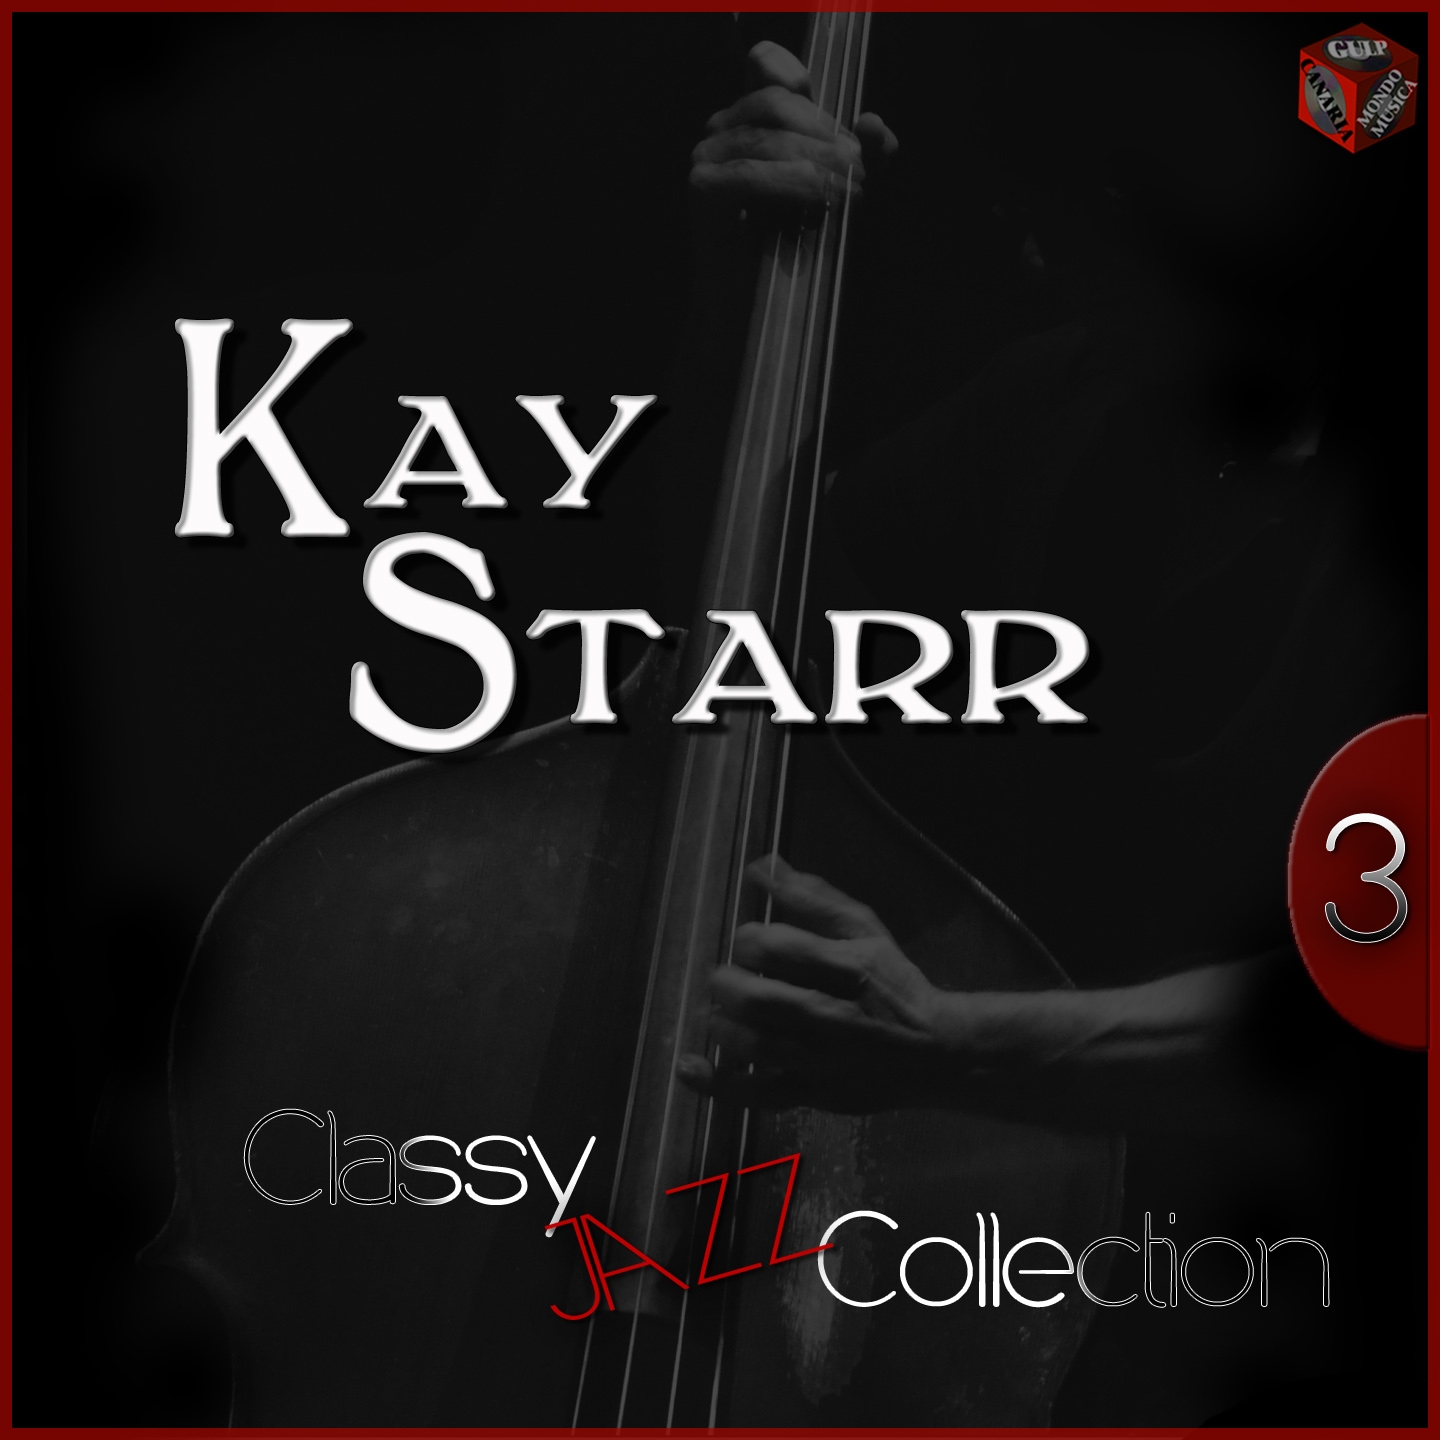 Classy Jazz Collection: Kay Starr, Vol. 3